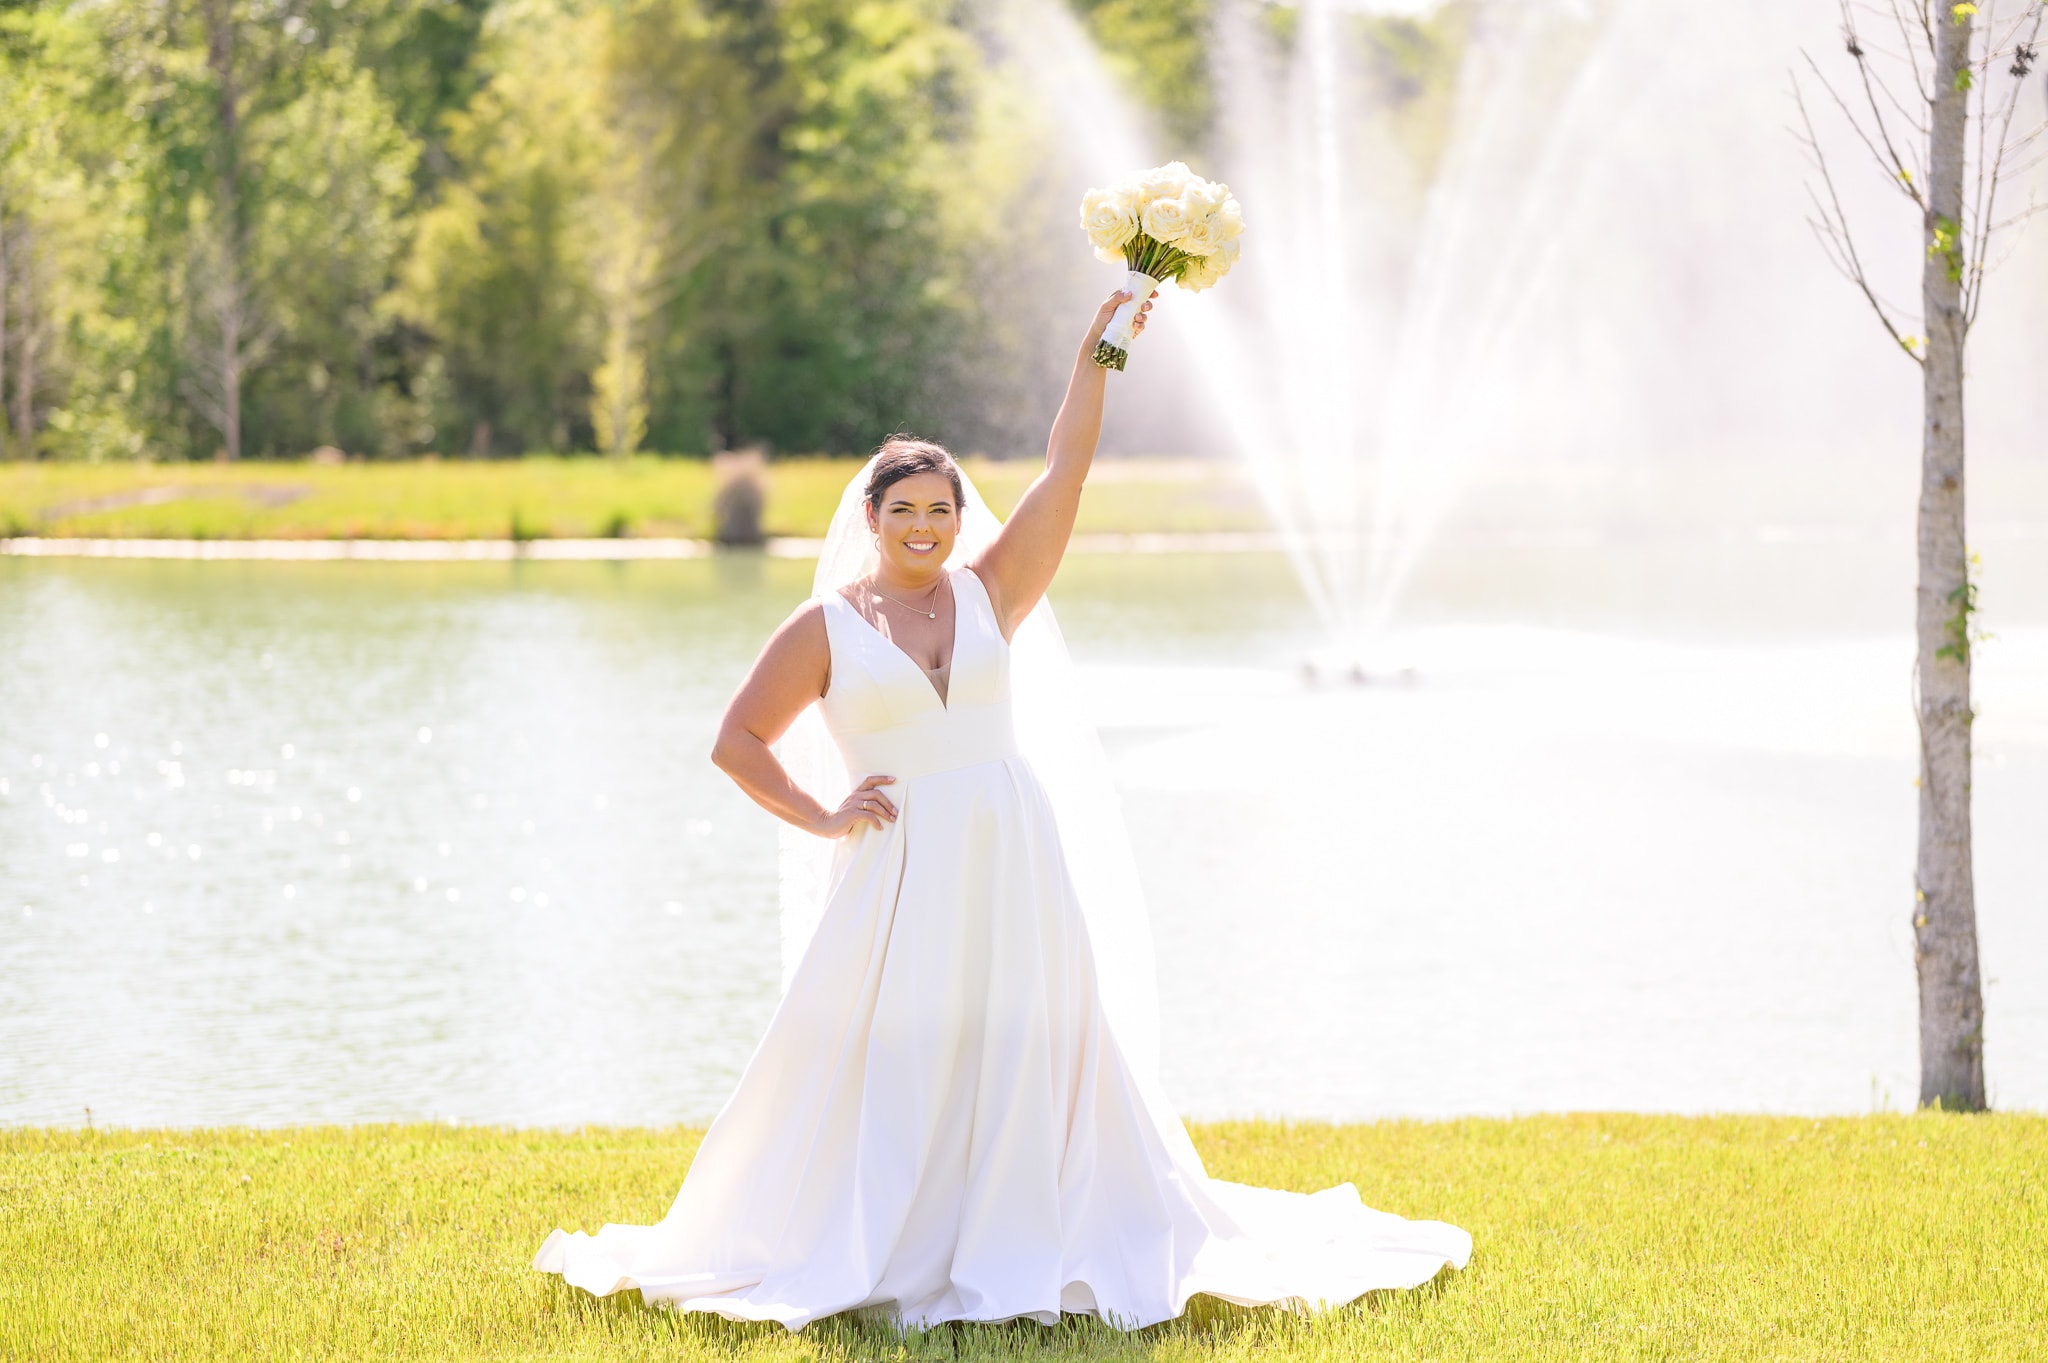 Portraits of the bride by the fountain - The Venue at White Oaks Farm